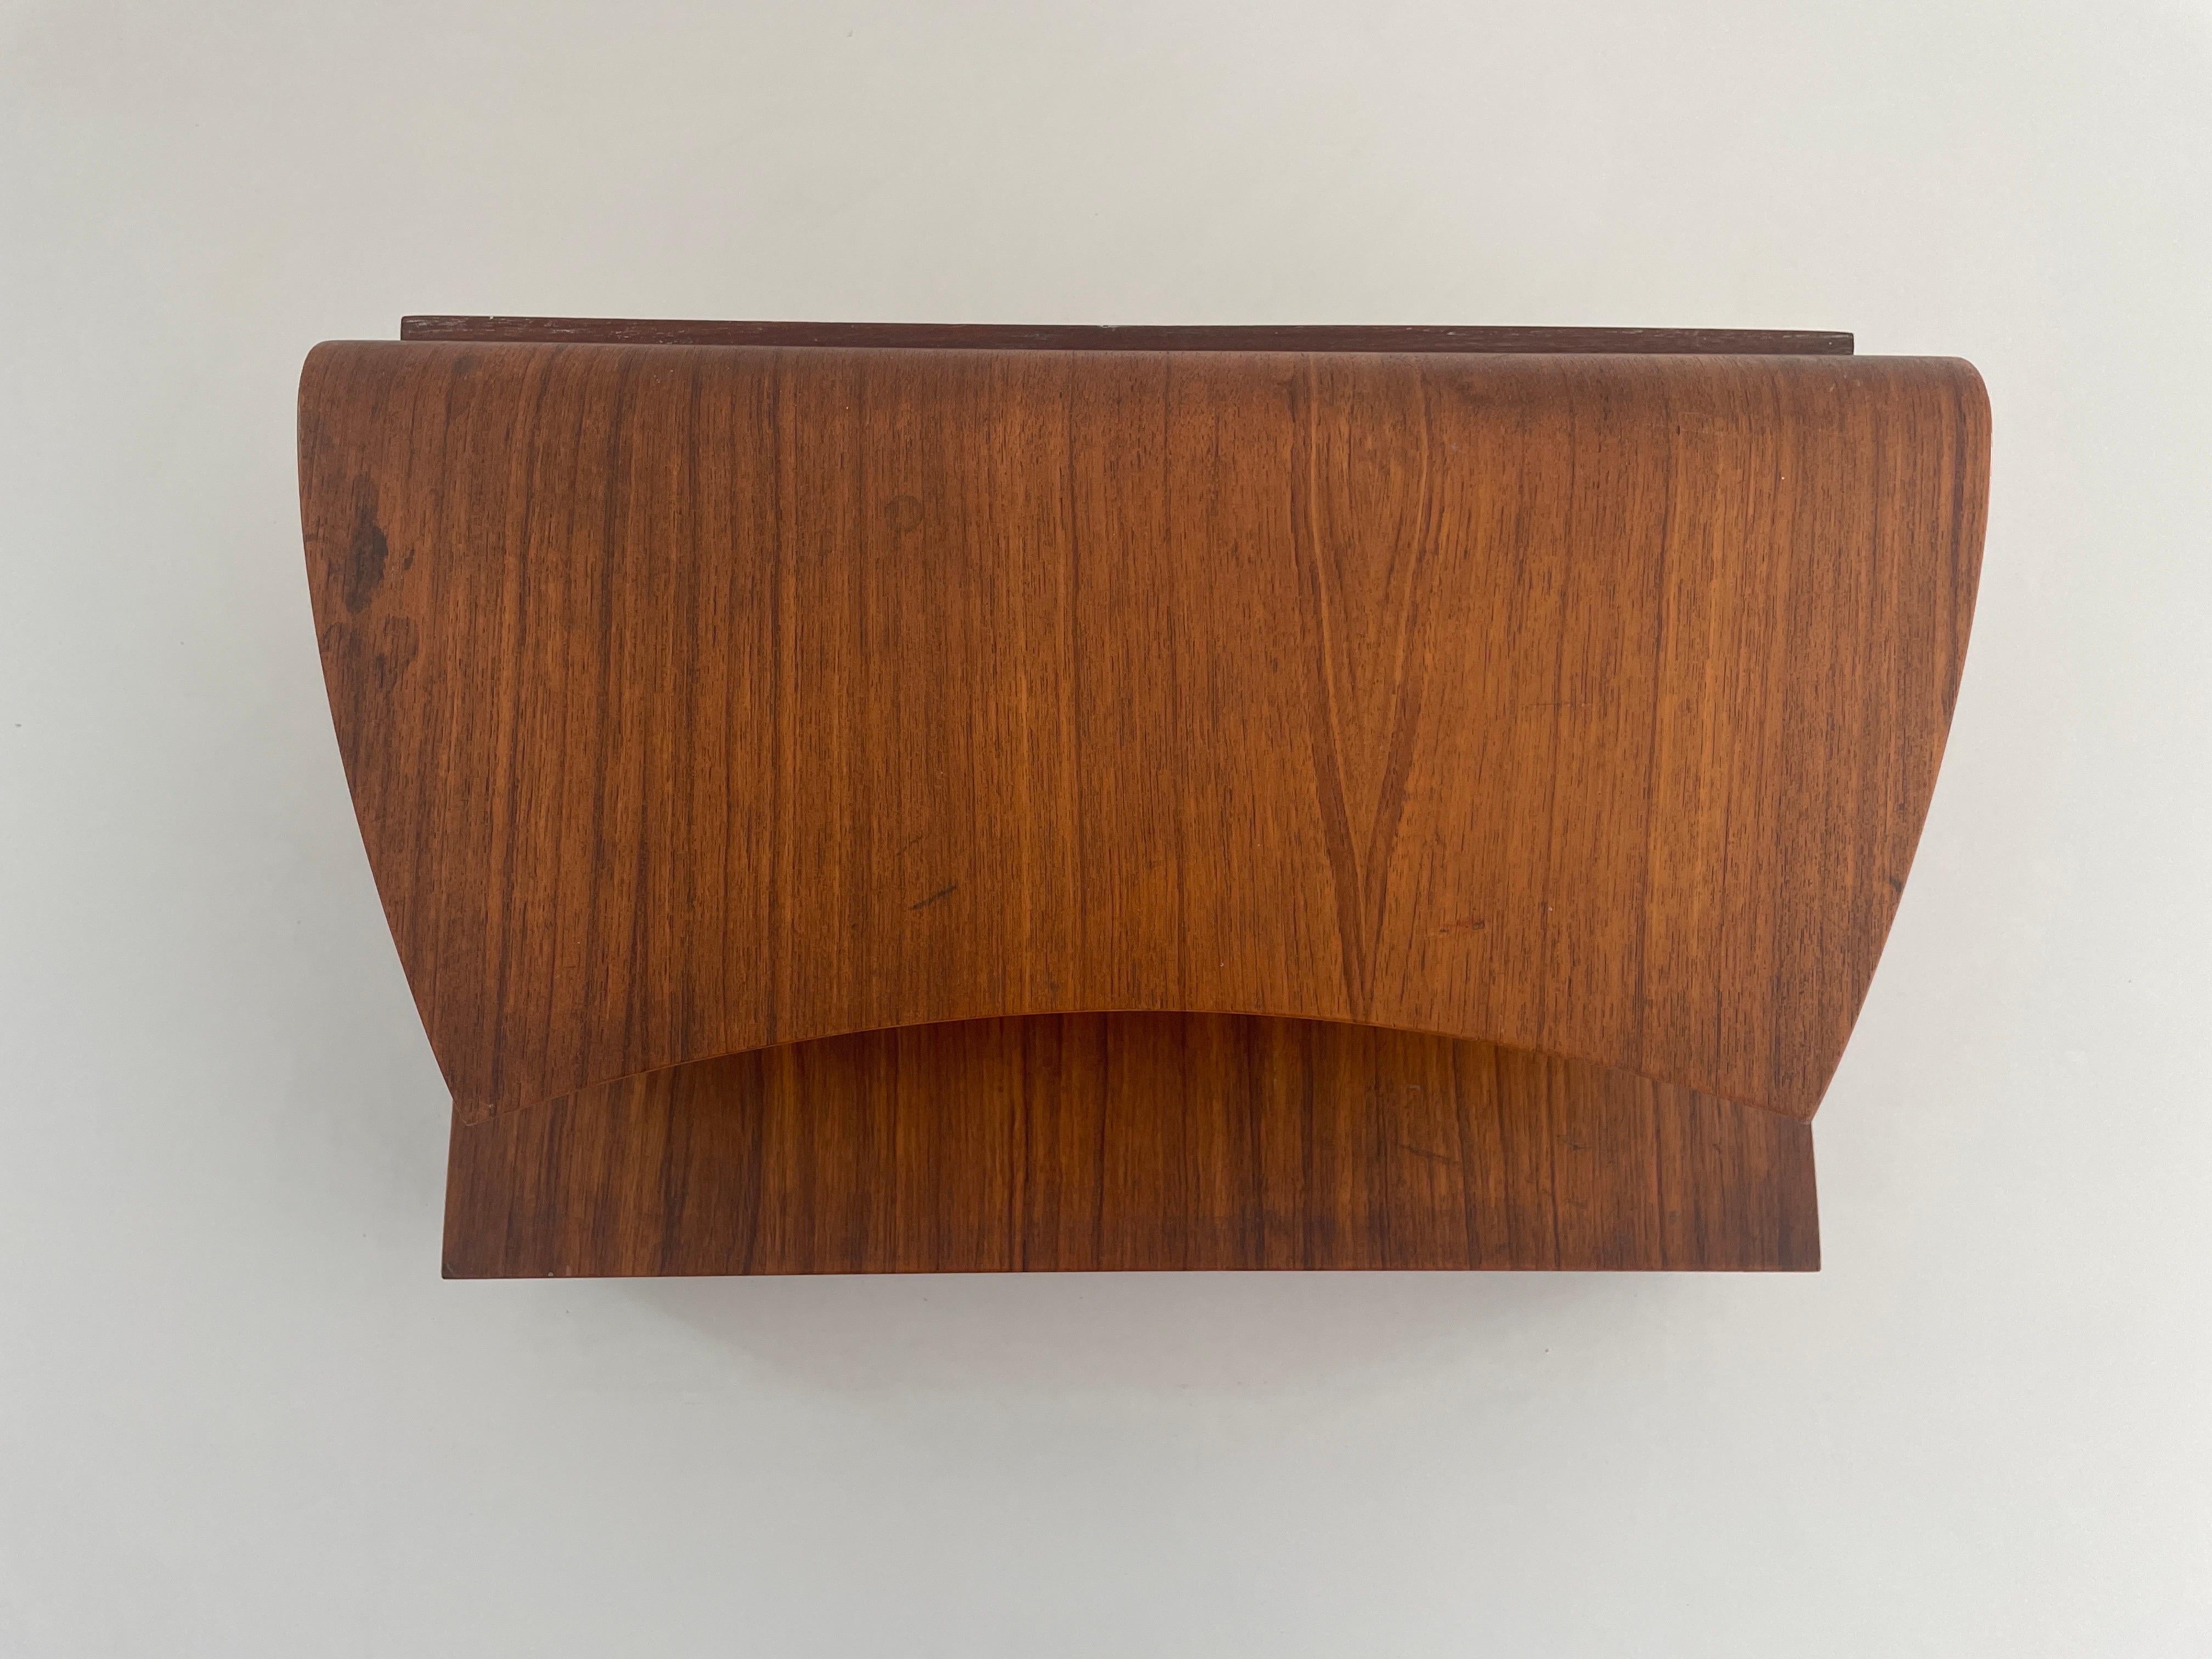 Italian Wood Floating Shelf with Drawer, 1960s, Italy For Sale 1